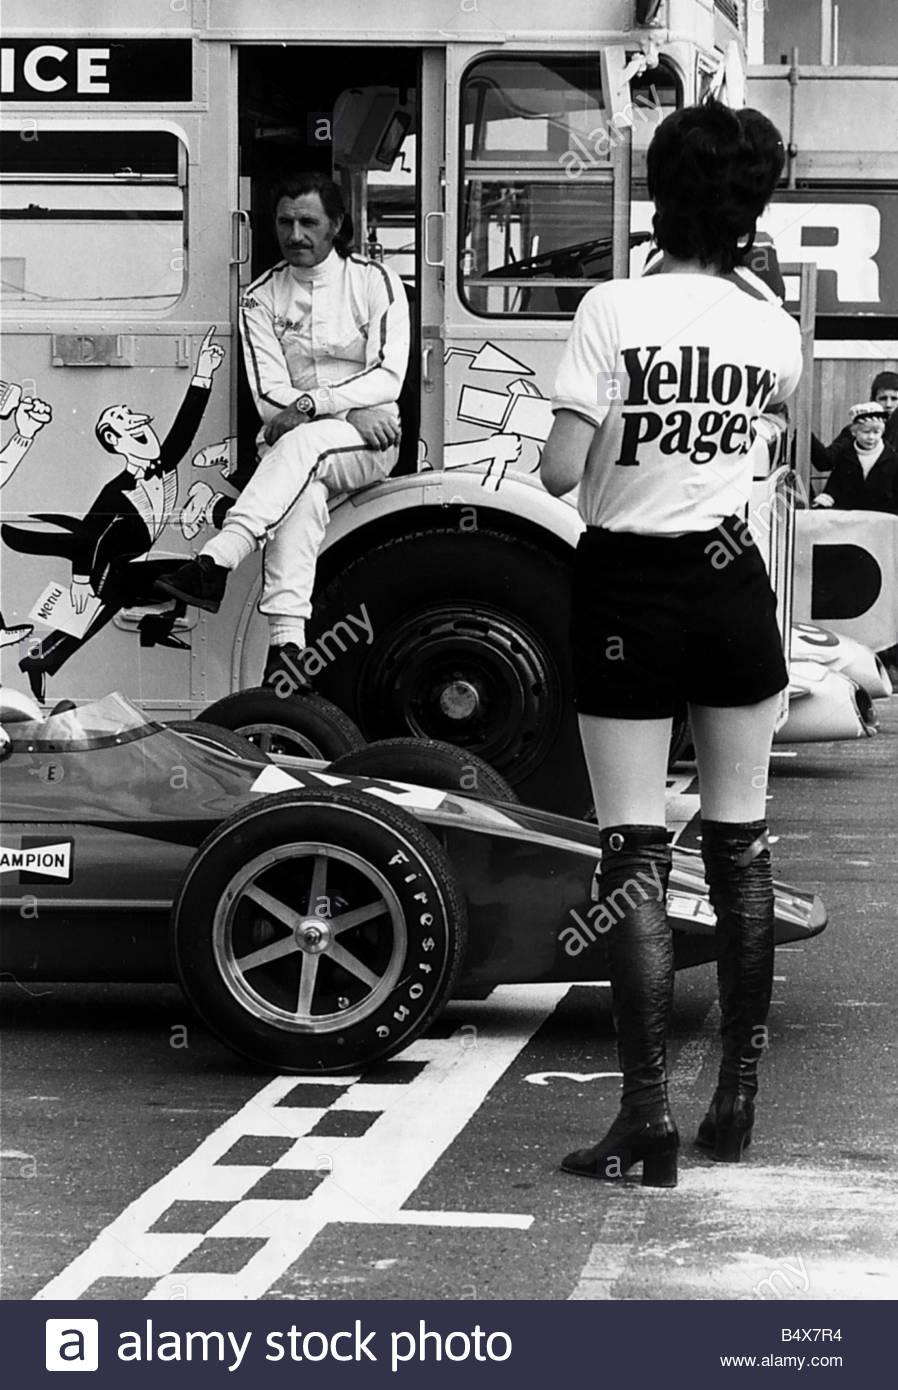 Graham Hill with a “yellow pages” girl in 1971.